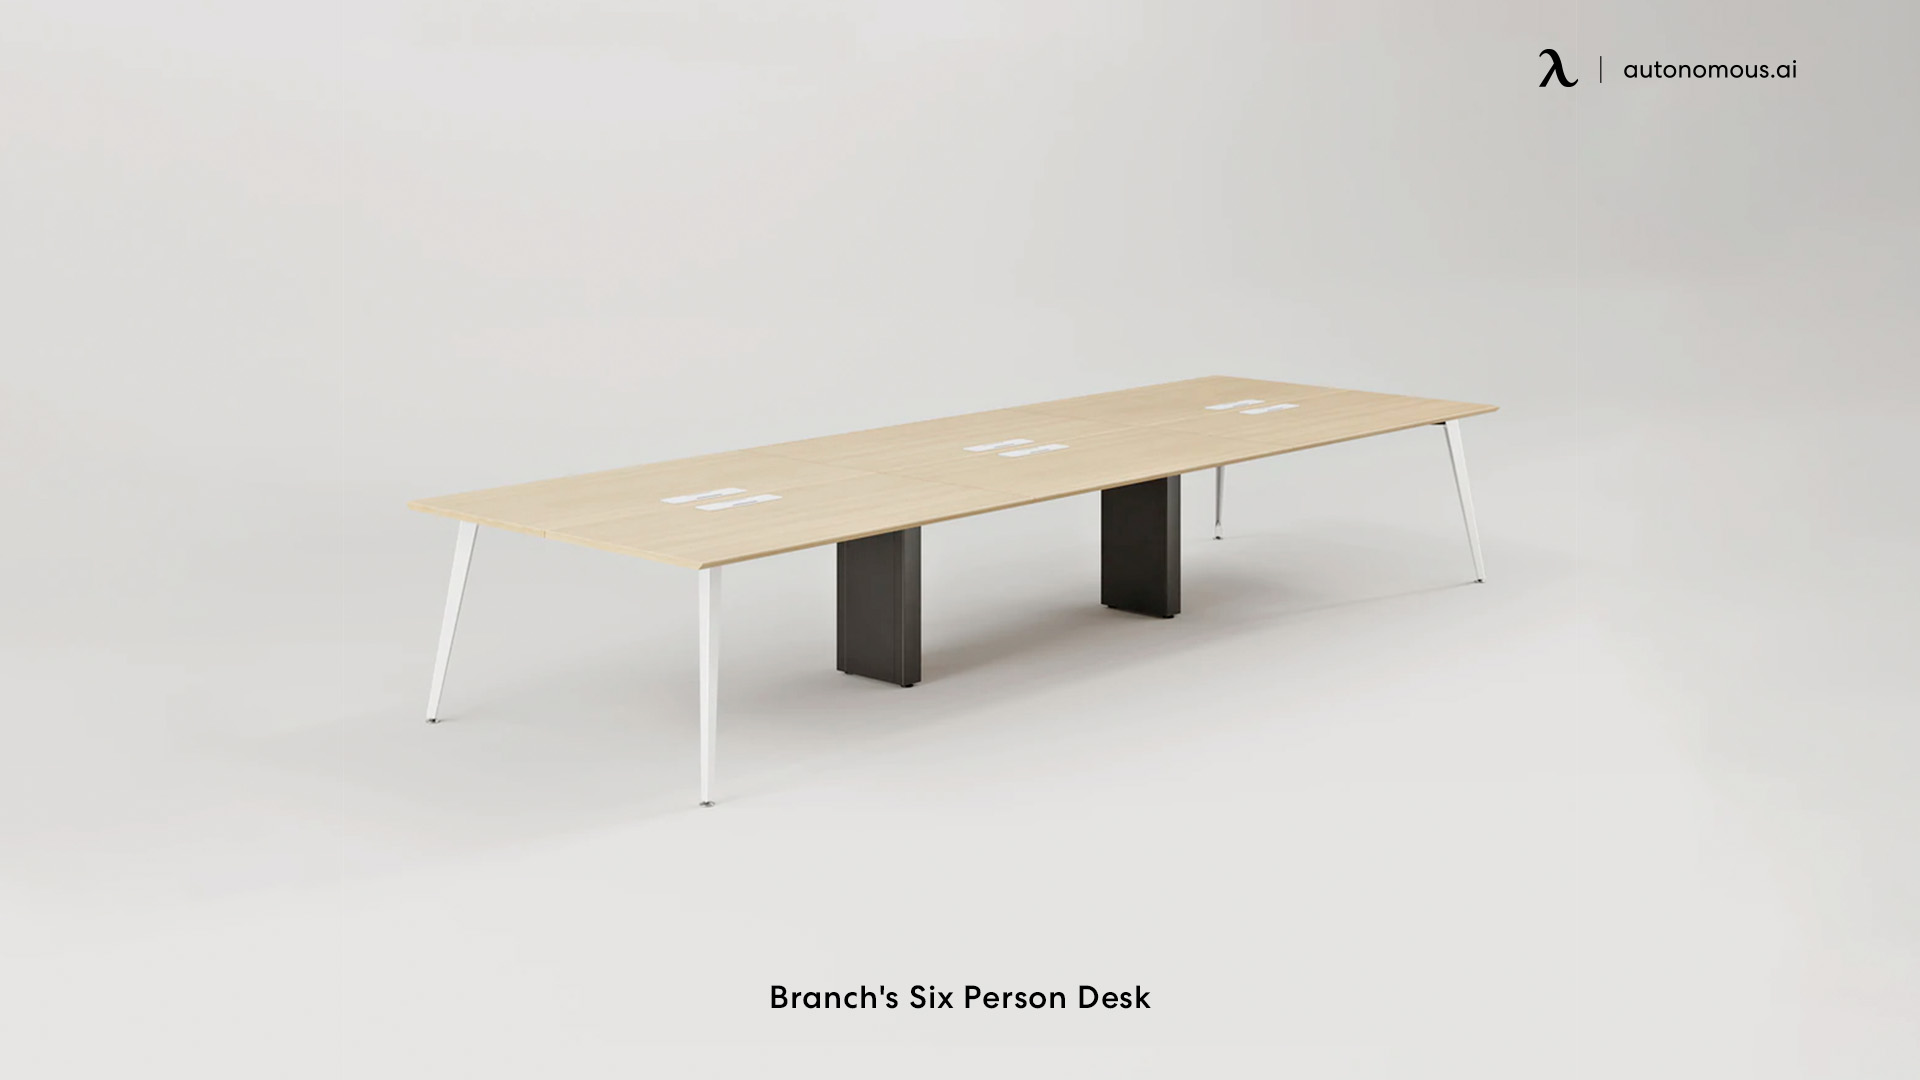 Branch's Six Person working desk